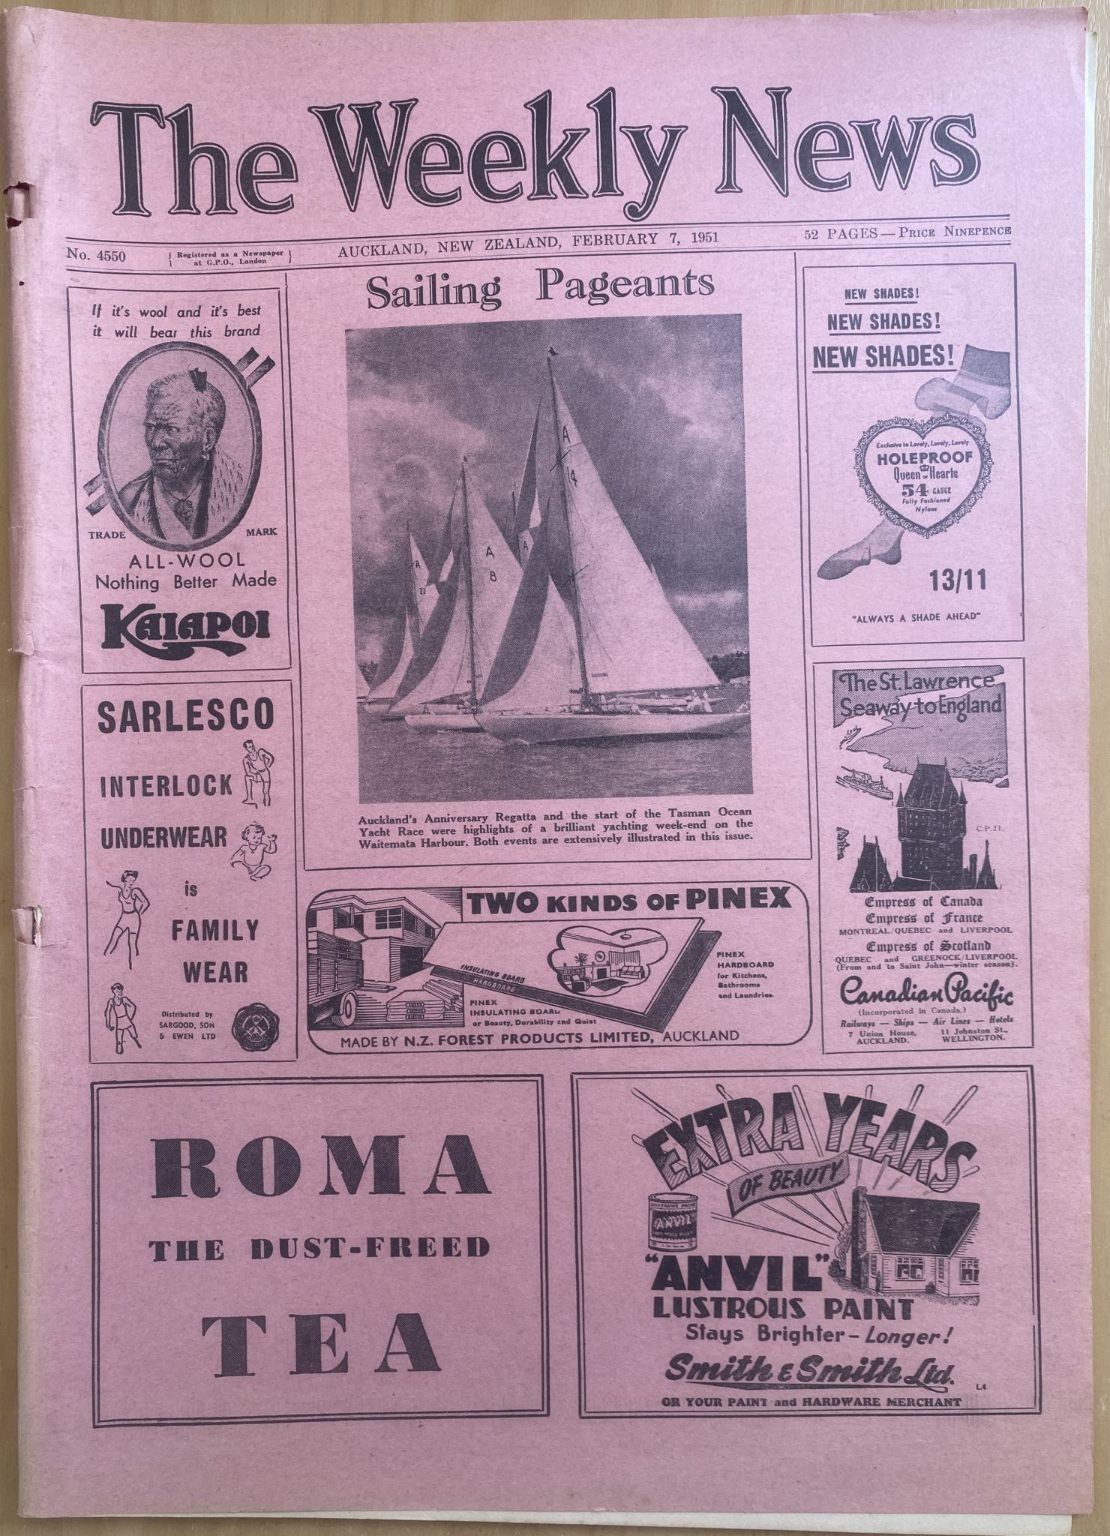 OLD NEWSPAPER: The Weekly News, No. 4550, 7 February 1951